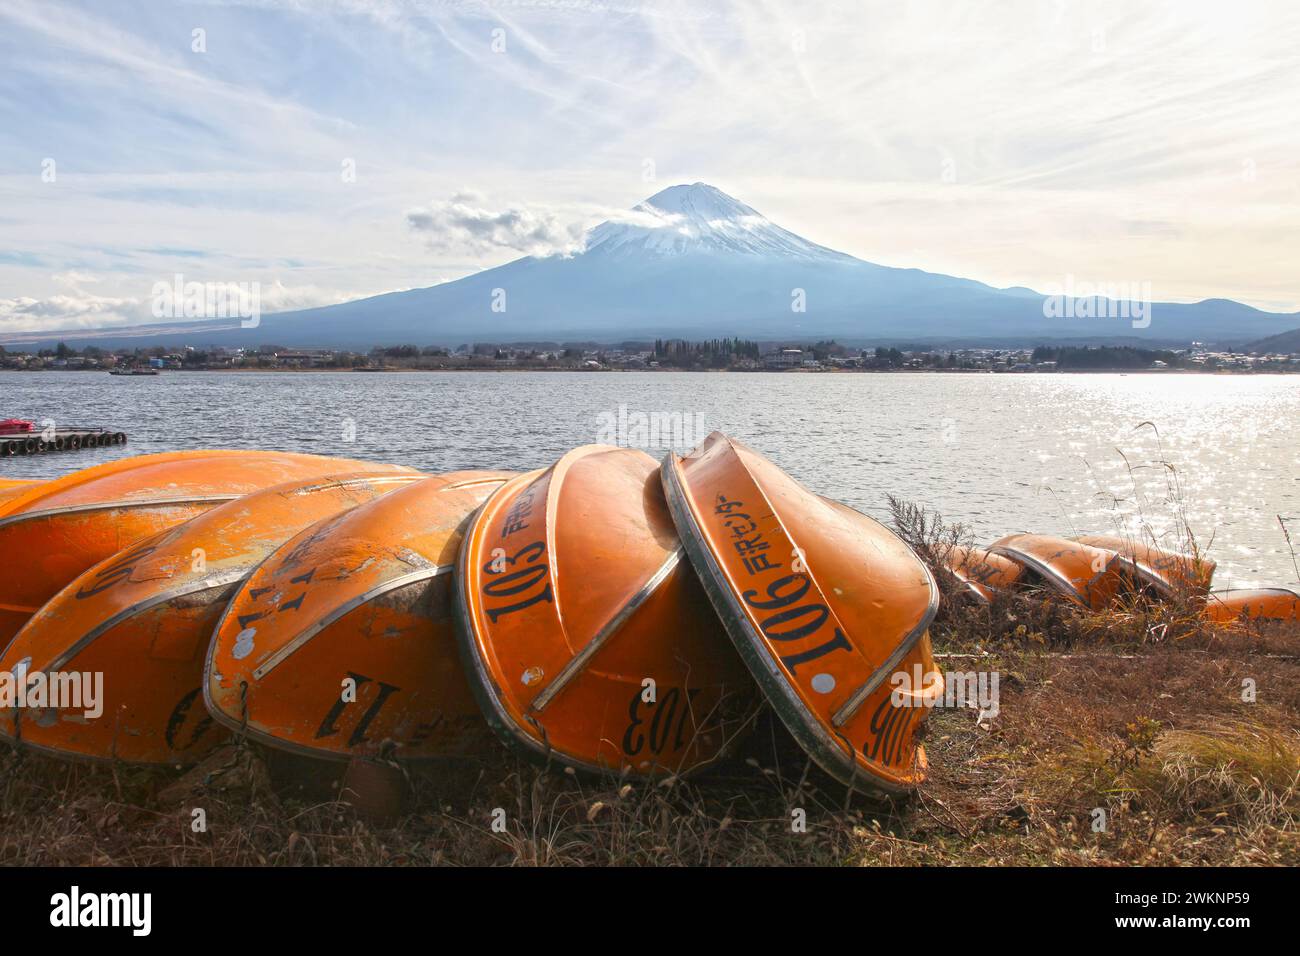 Lake Kawaguchi with Mt. Fuji in the background and several orange colored boats in the foreground. Stock Photo